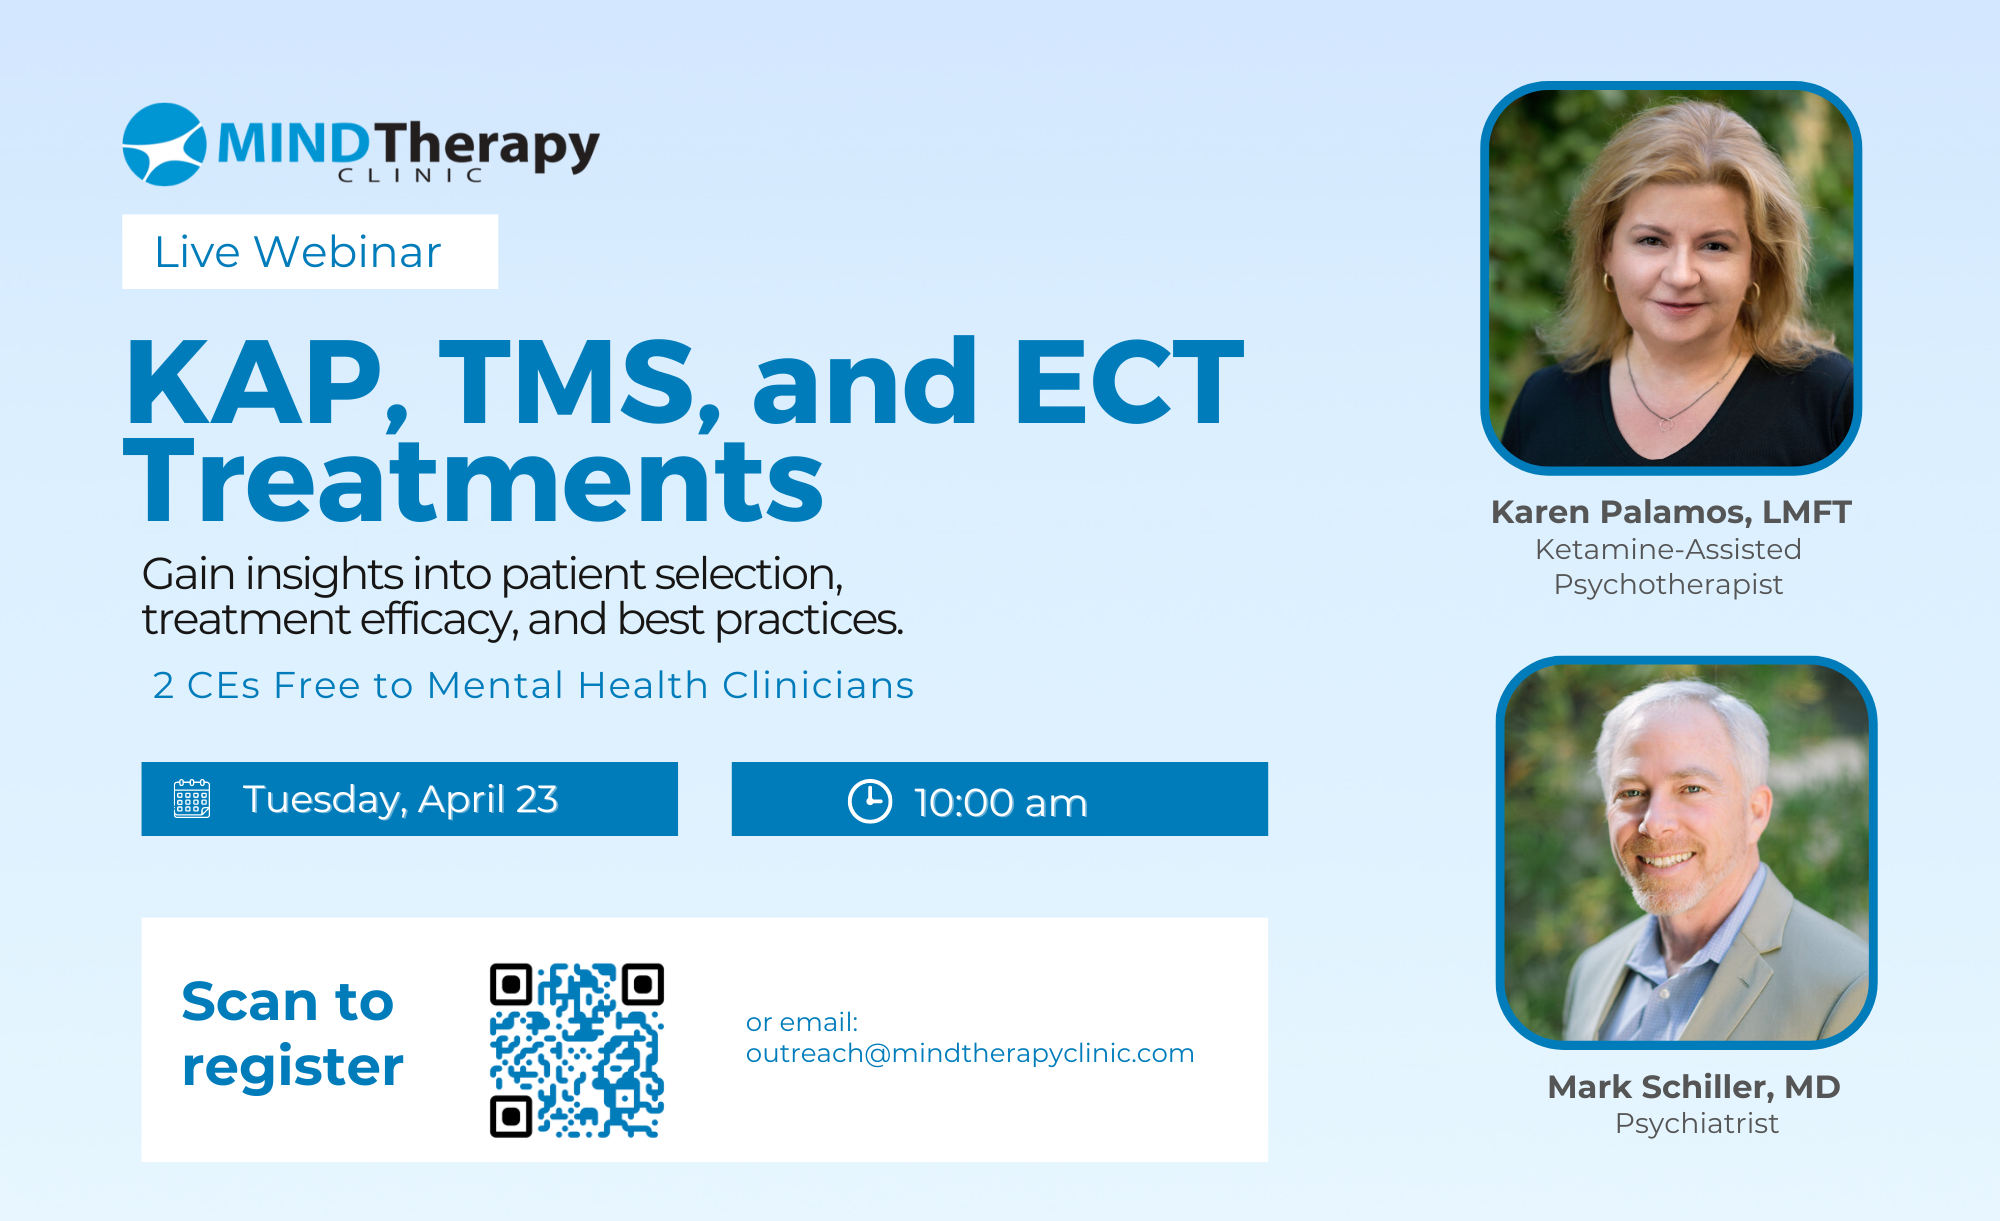 Mind Therapy Clinic KAP, TMS and ECT Treatments, April 23